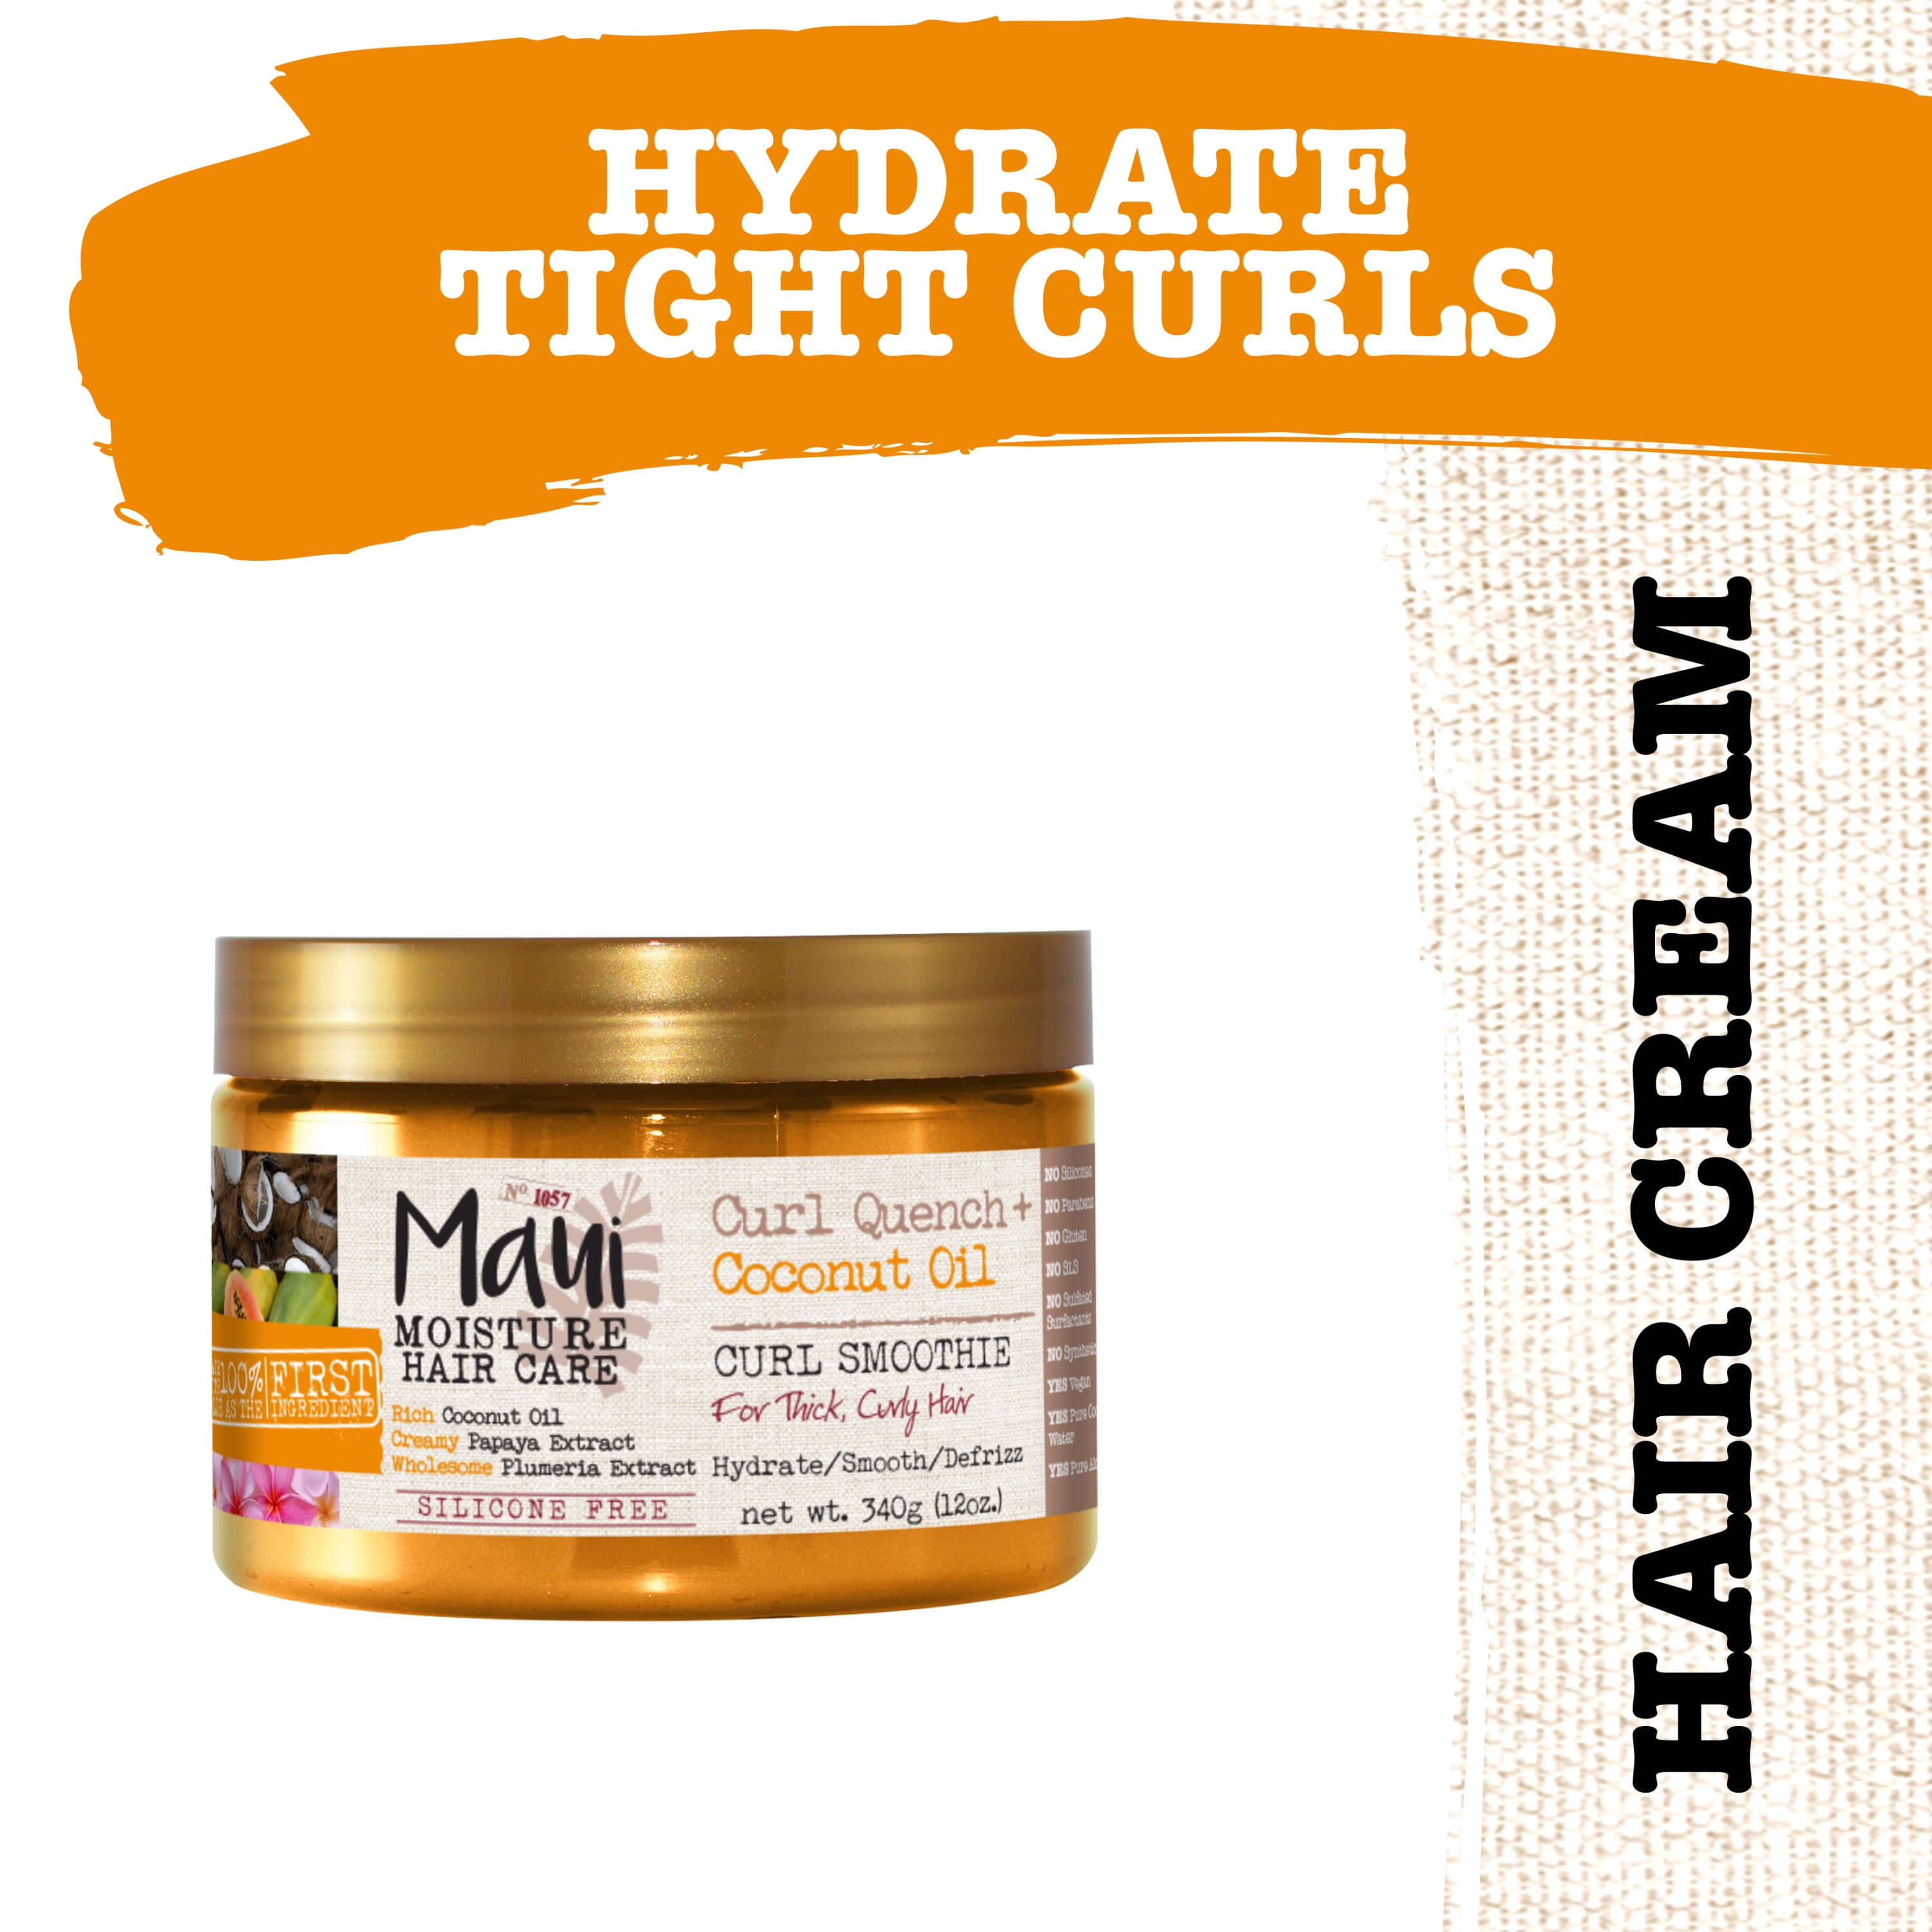 Maui Moisture Curl Quench + Coconut Oil Hydrating Curl Smoothie, Creamy Silicone-Free Styling Cream for Tight Curls, Braids, Wash & Go Styles 12 oz